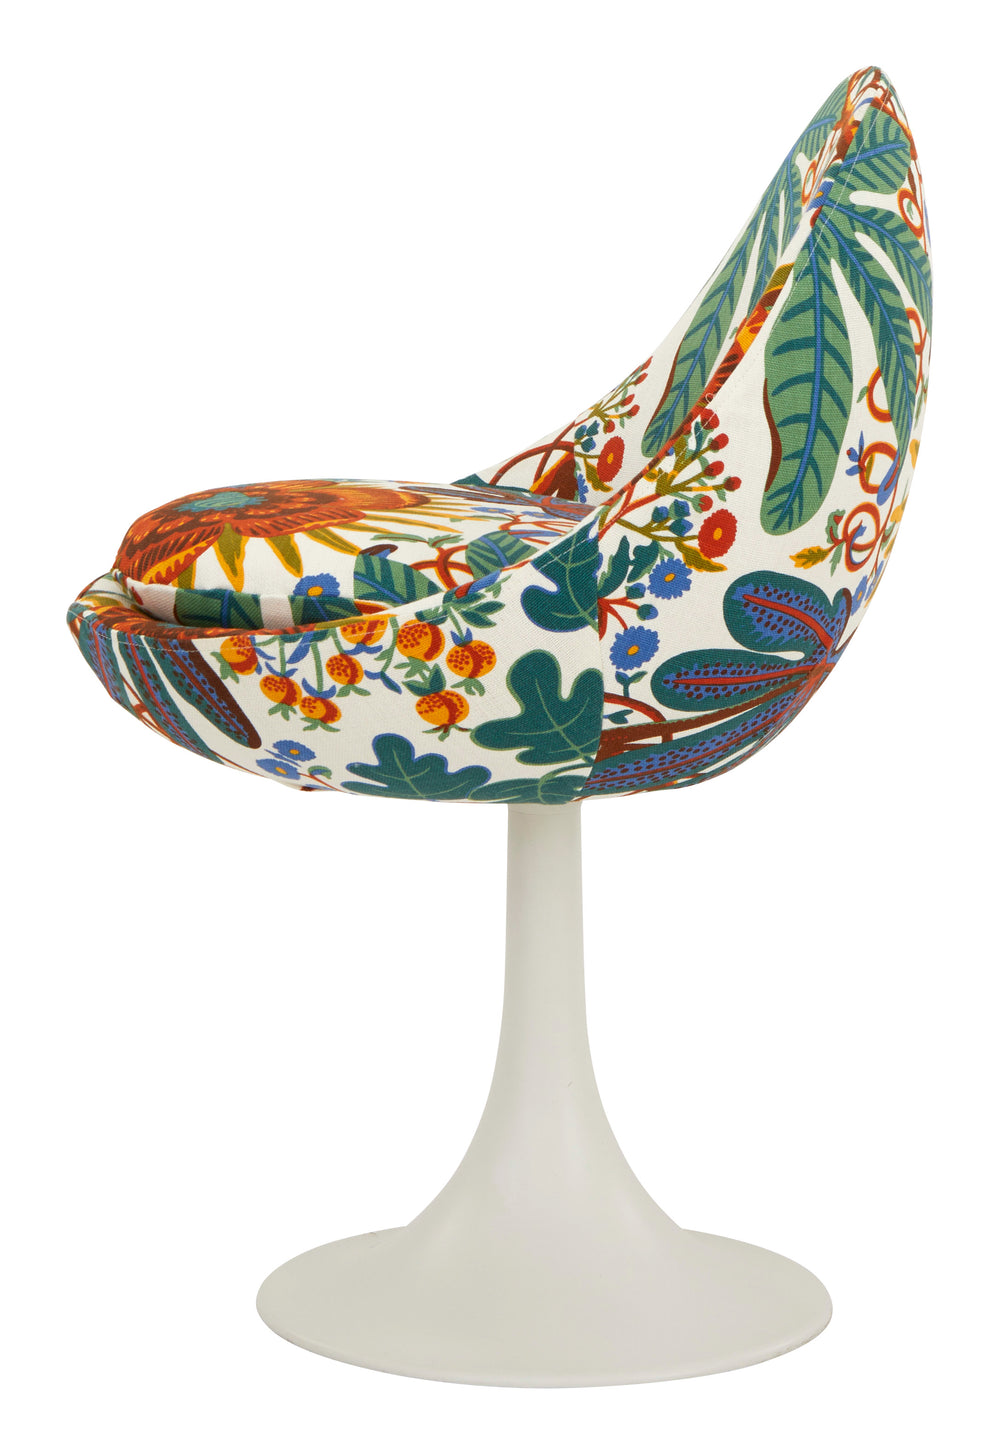 Vintage Upholstered Tulip Chair